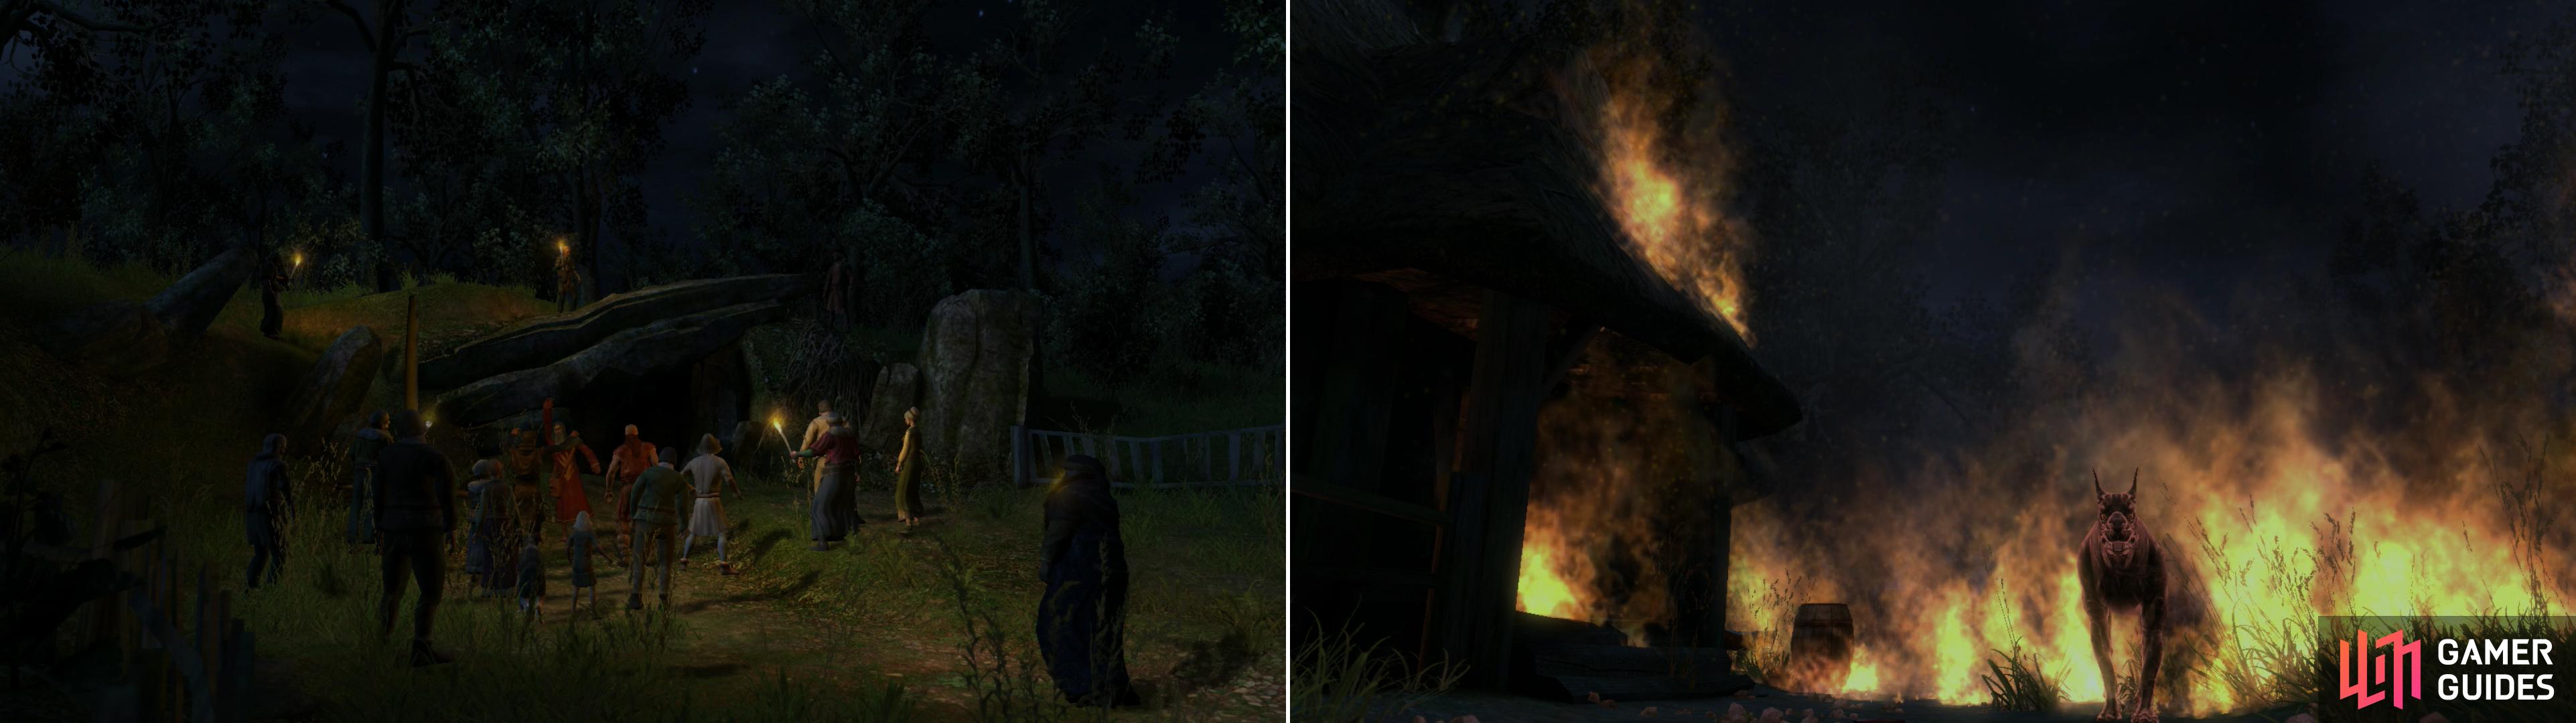 Outside the cave, the Reverend has whipped up the villagers into a frenzy that can only be quenched by the blood of Abigail, their chosen scape-goat for The Beast, which was actually summoned by their own crimes (left). After dealing with the mob-one way or another-you can finally confront The Beast (right).